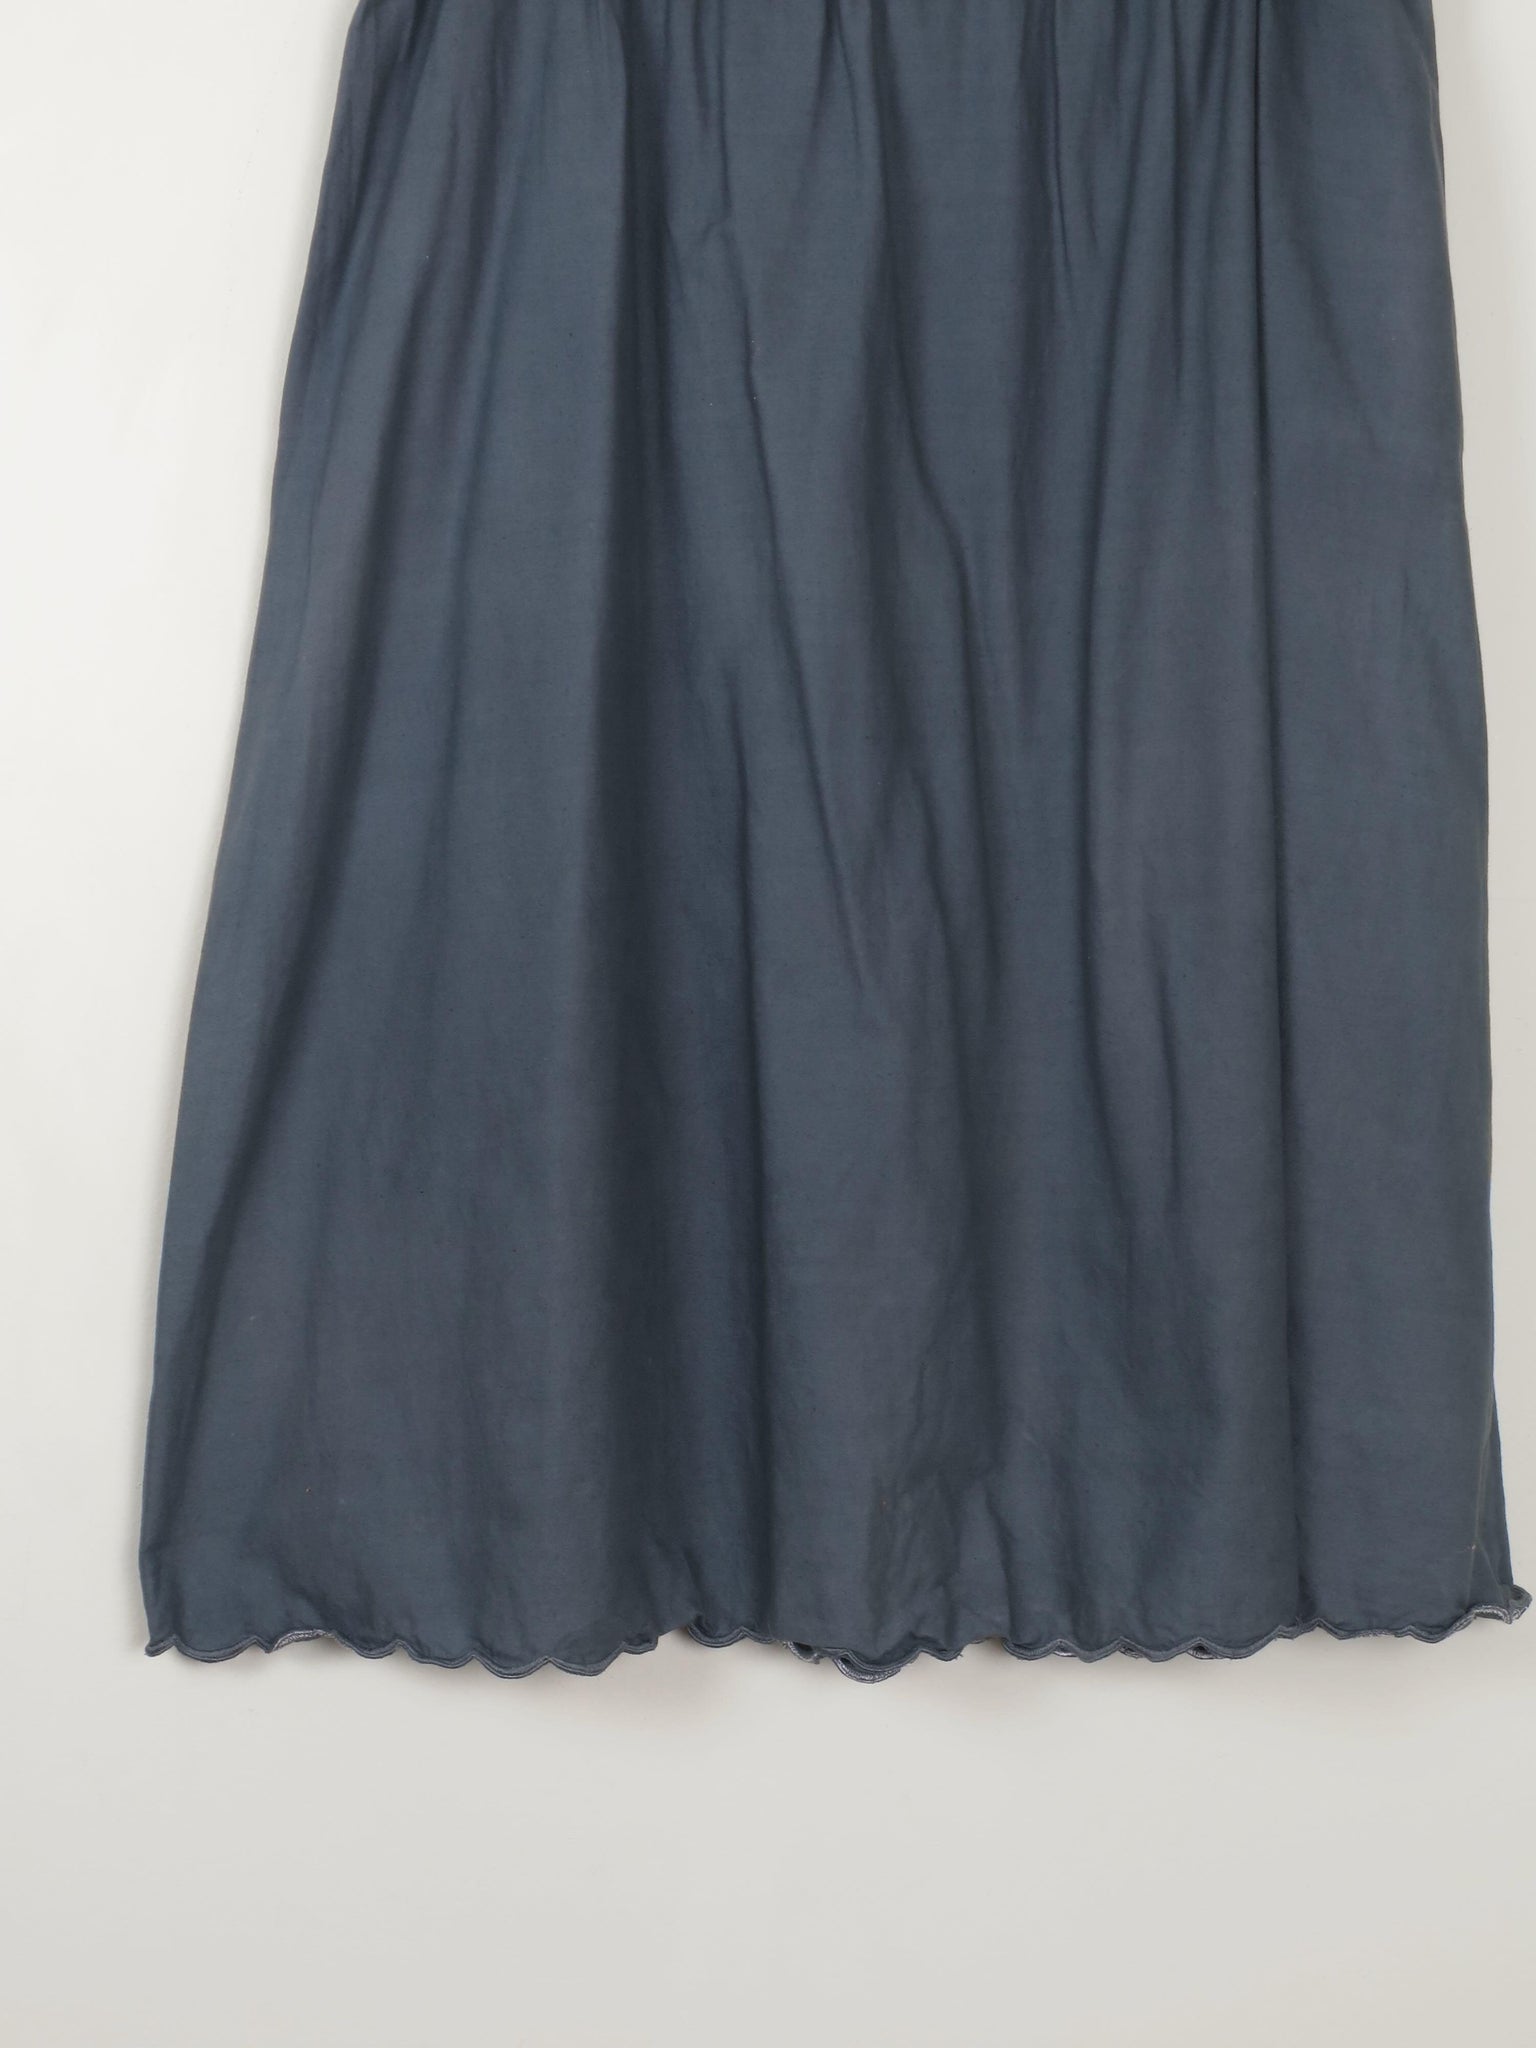 Vintage Charcoal With Cutout Skirt L/XL - The Harlequin